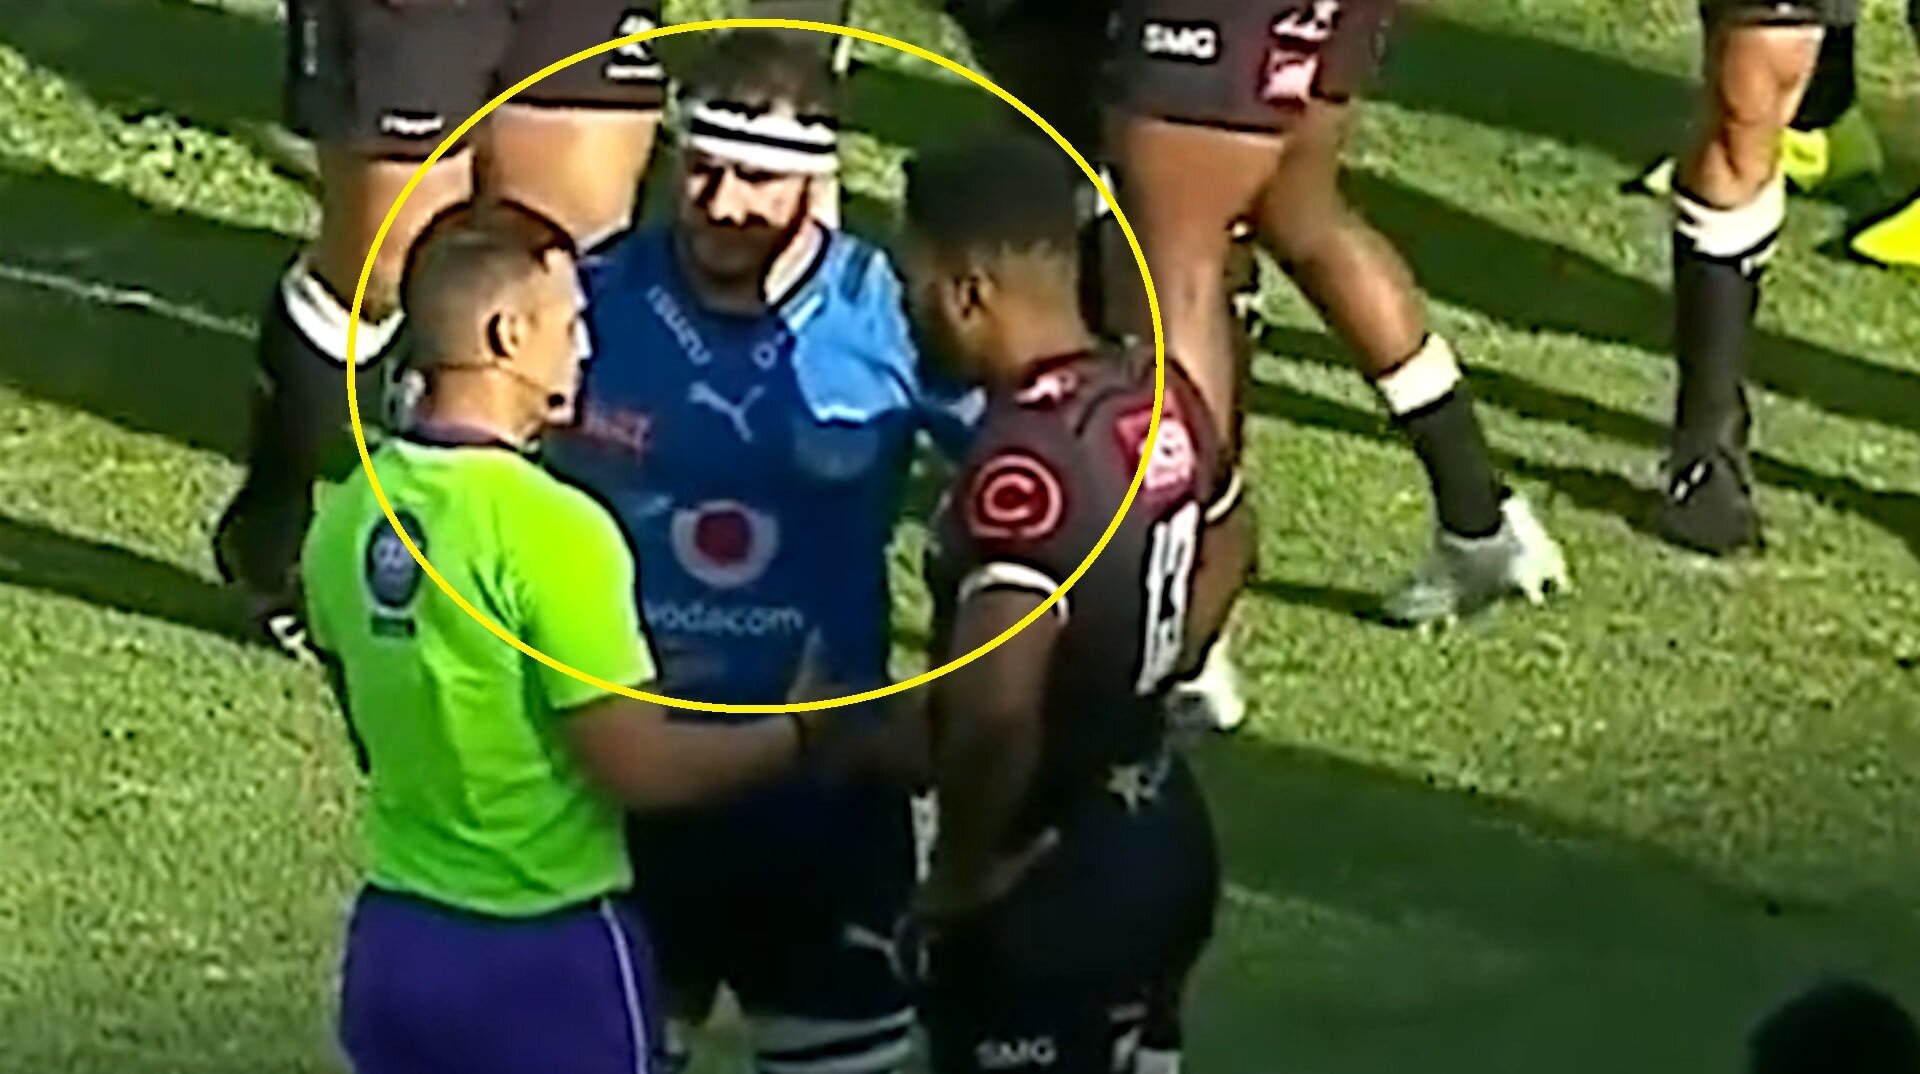 Referee forced to deal with poor South African player behaviour